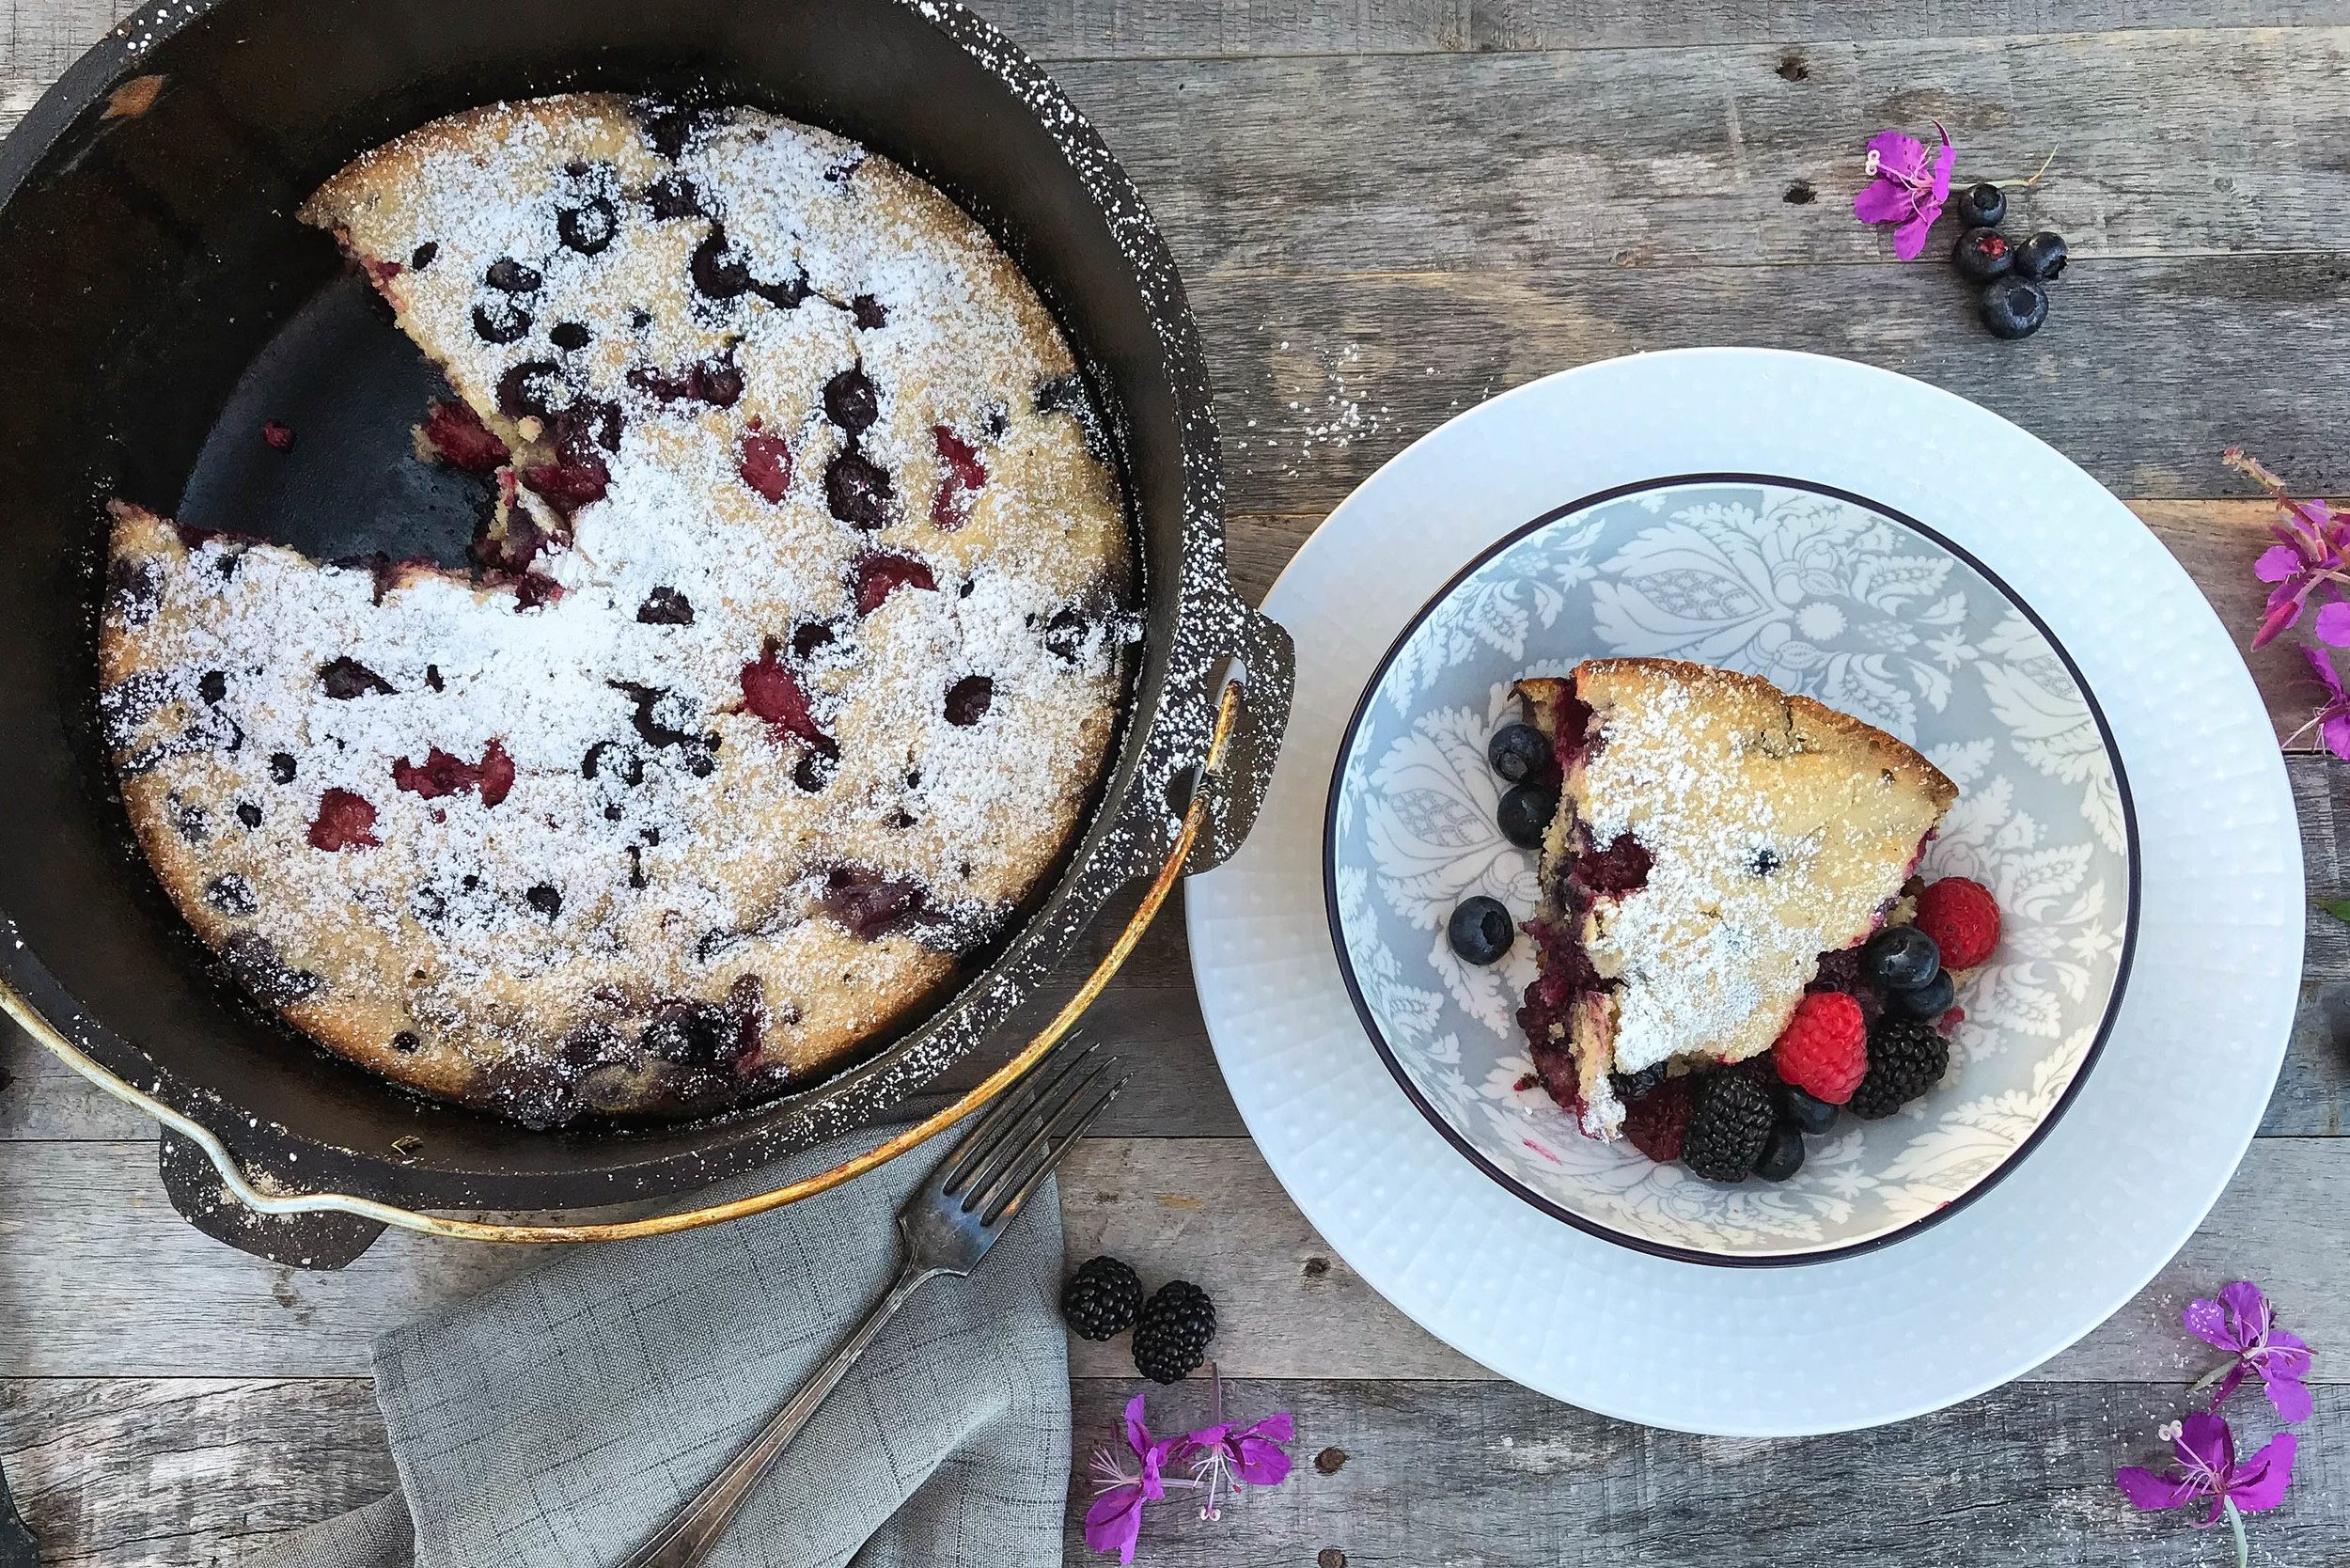 Alaskan Blueberry Cake from Scratch Dutch oven or indoors